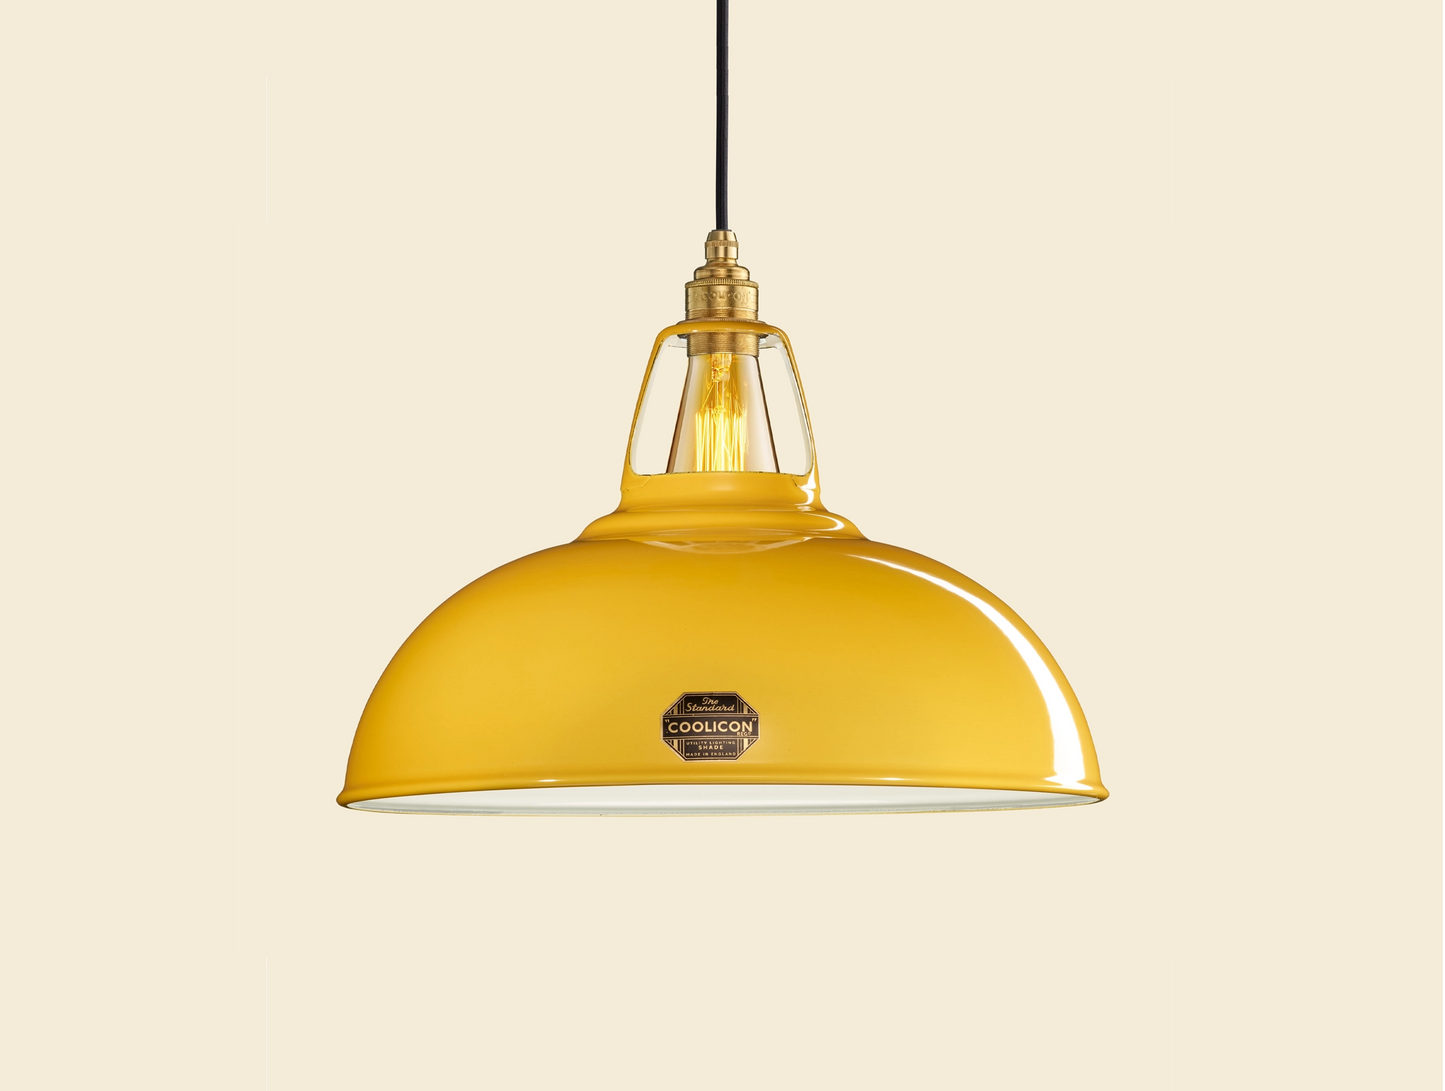 Large Deep Yellow Coolicon lampshade with a Porcelain pendant set over a yellow background